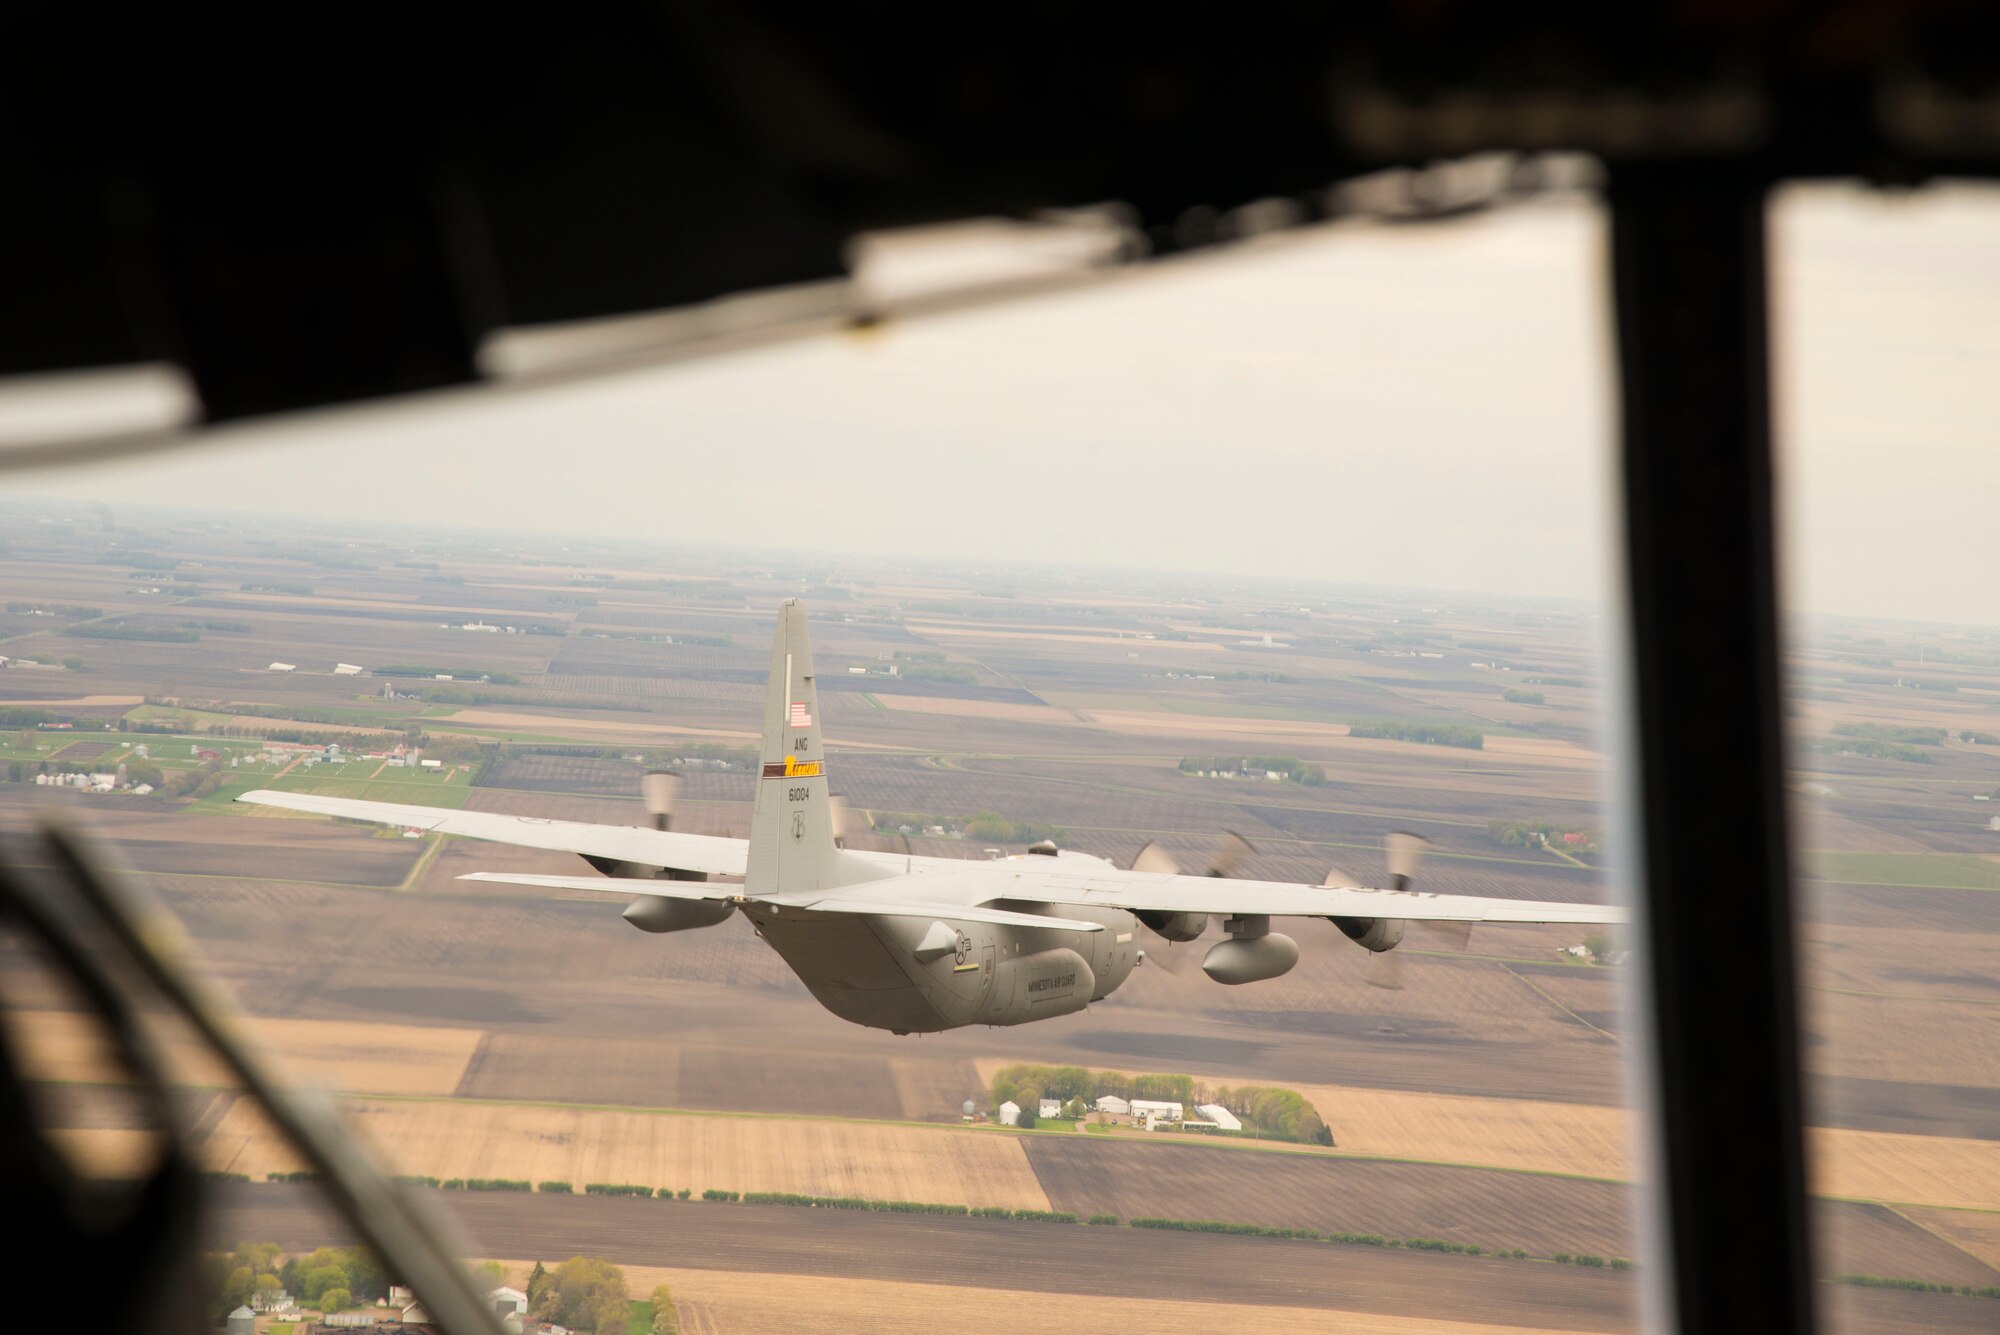 A U.S. Air Force C-130 from the 133rd Airlift Wing flies with a C-130 from the 934th Airlift Wing during a flyover in Minnesota, May 13, 2020. The 934th Airlift Wing along with the Minnesota National Guard’s 133rd Airlift Wing flew statewide flyovers in recognition of those on the frontlines of the COVID-19 pandemic response as part of Operation American Resolve. (U.S. Air Force photo by Chris Farley)